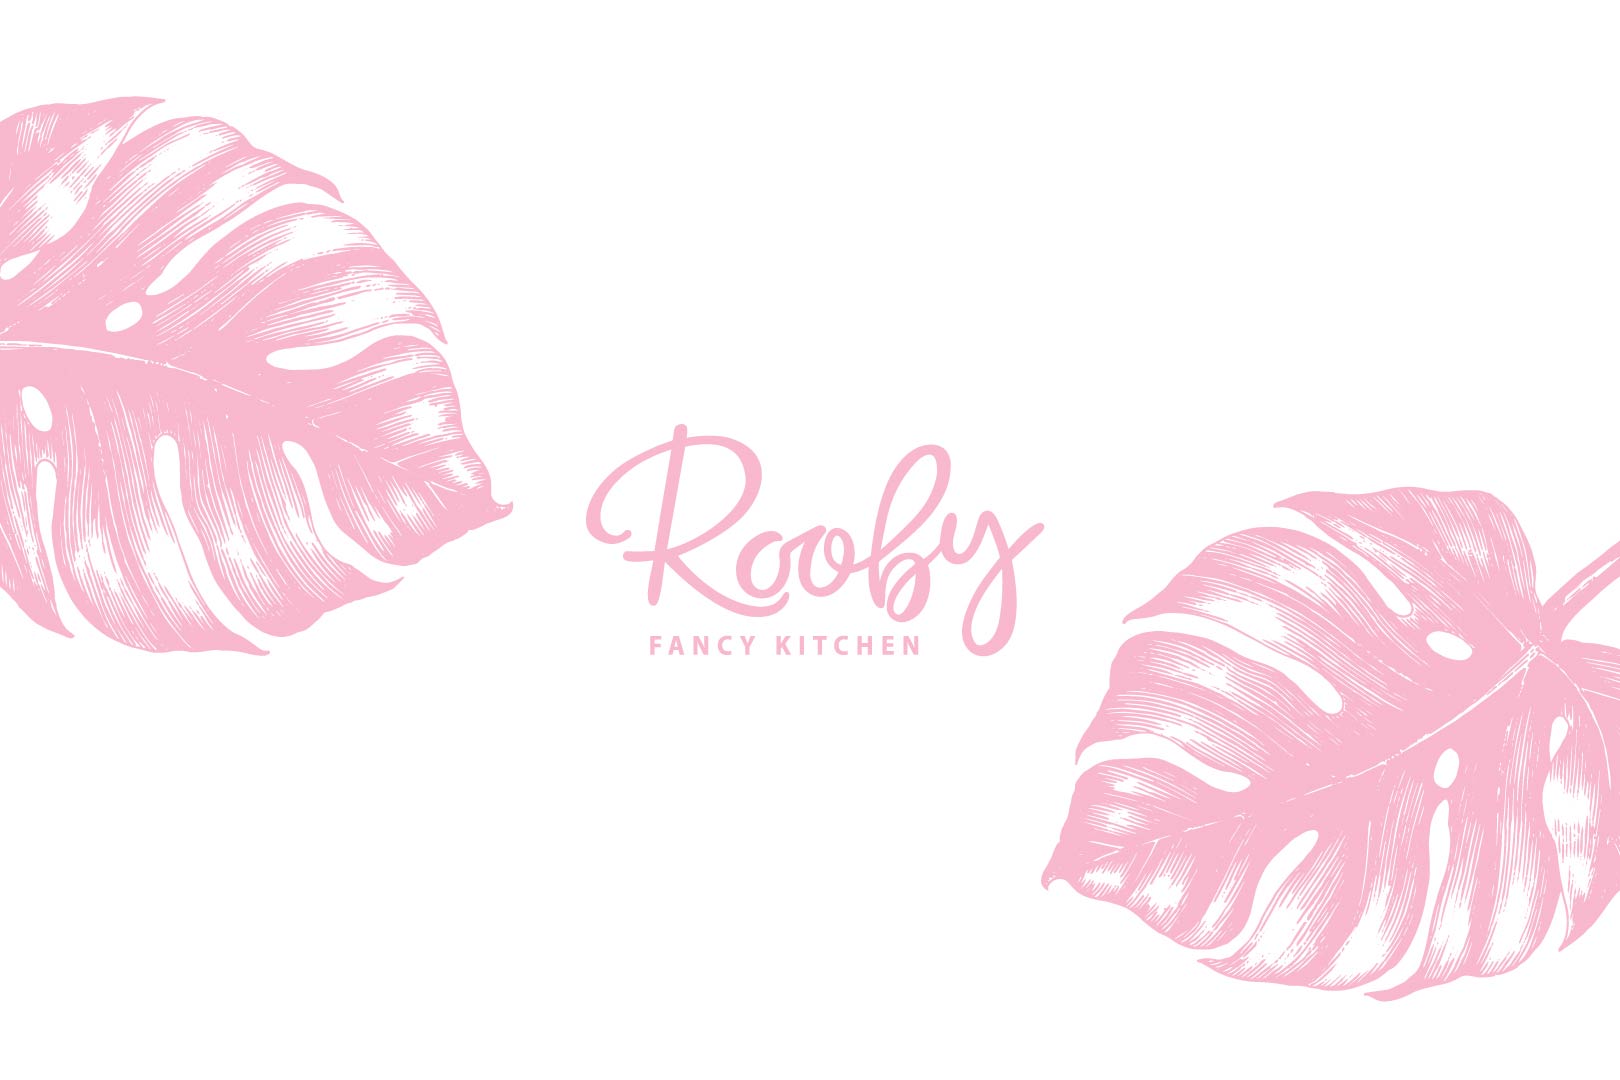 Rooby cafe branding and naming by Indigo branding